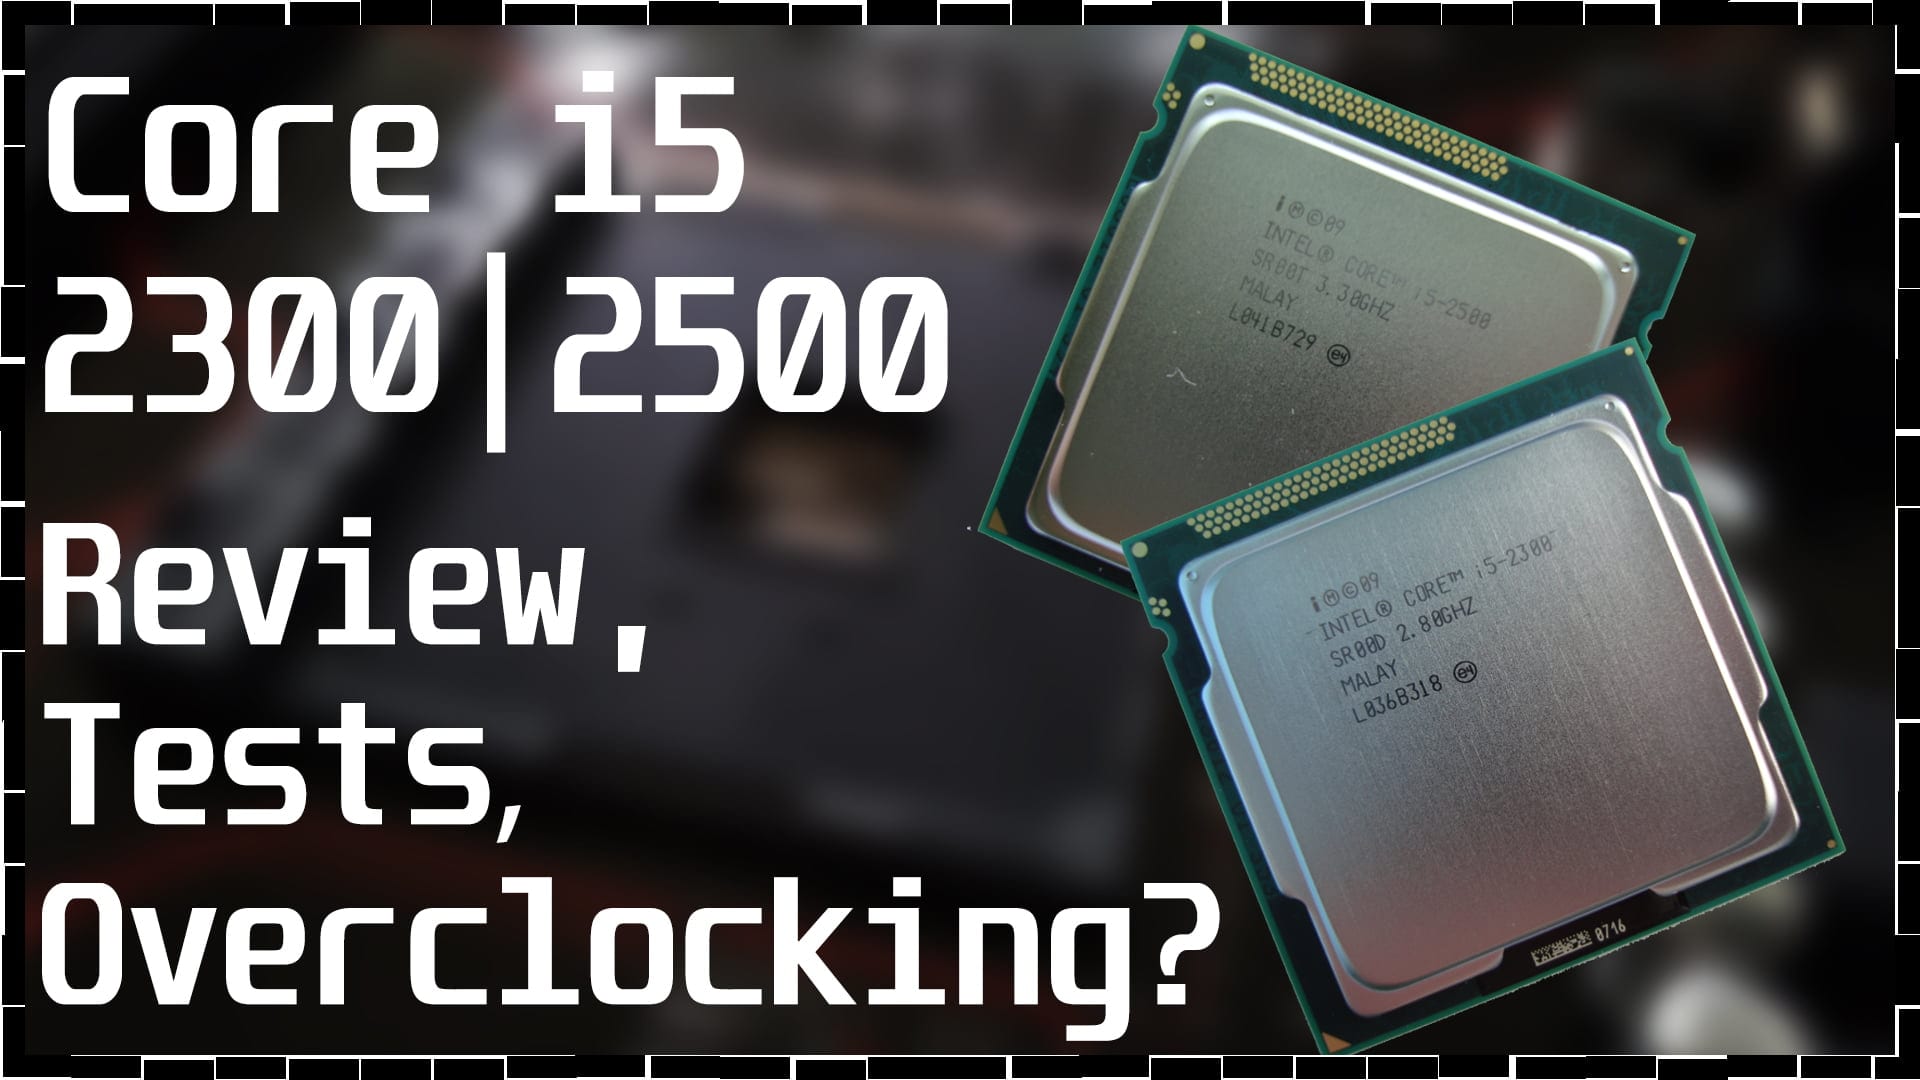 Intel Sandy Bridge Review Overclocking And Testing Of Core I5 2300 And Core I5 2500 Umtale Lab